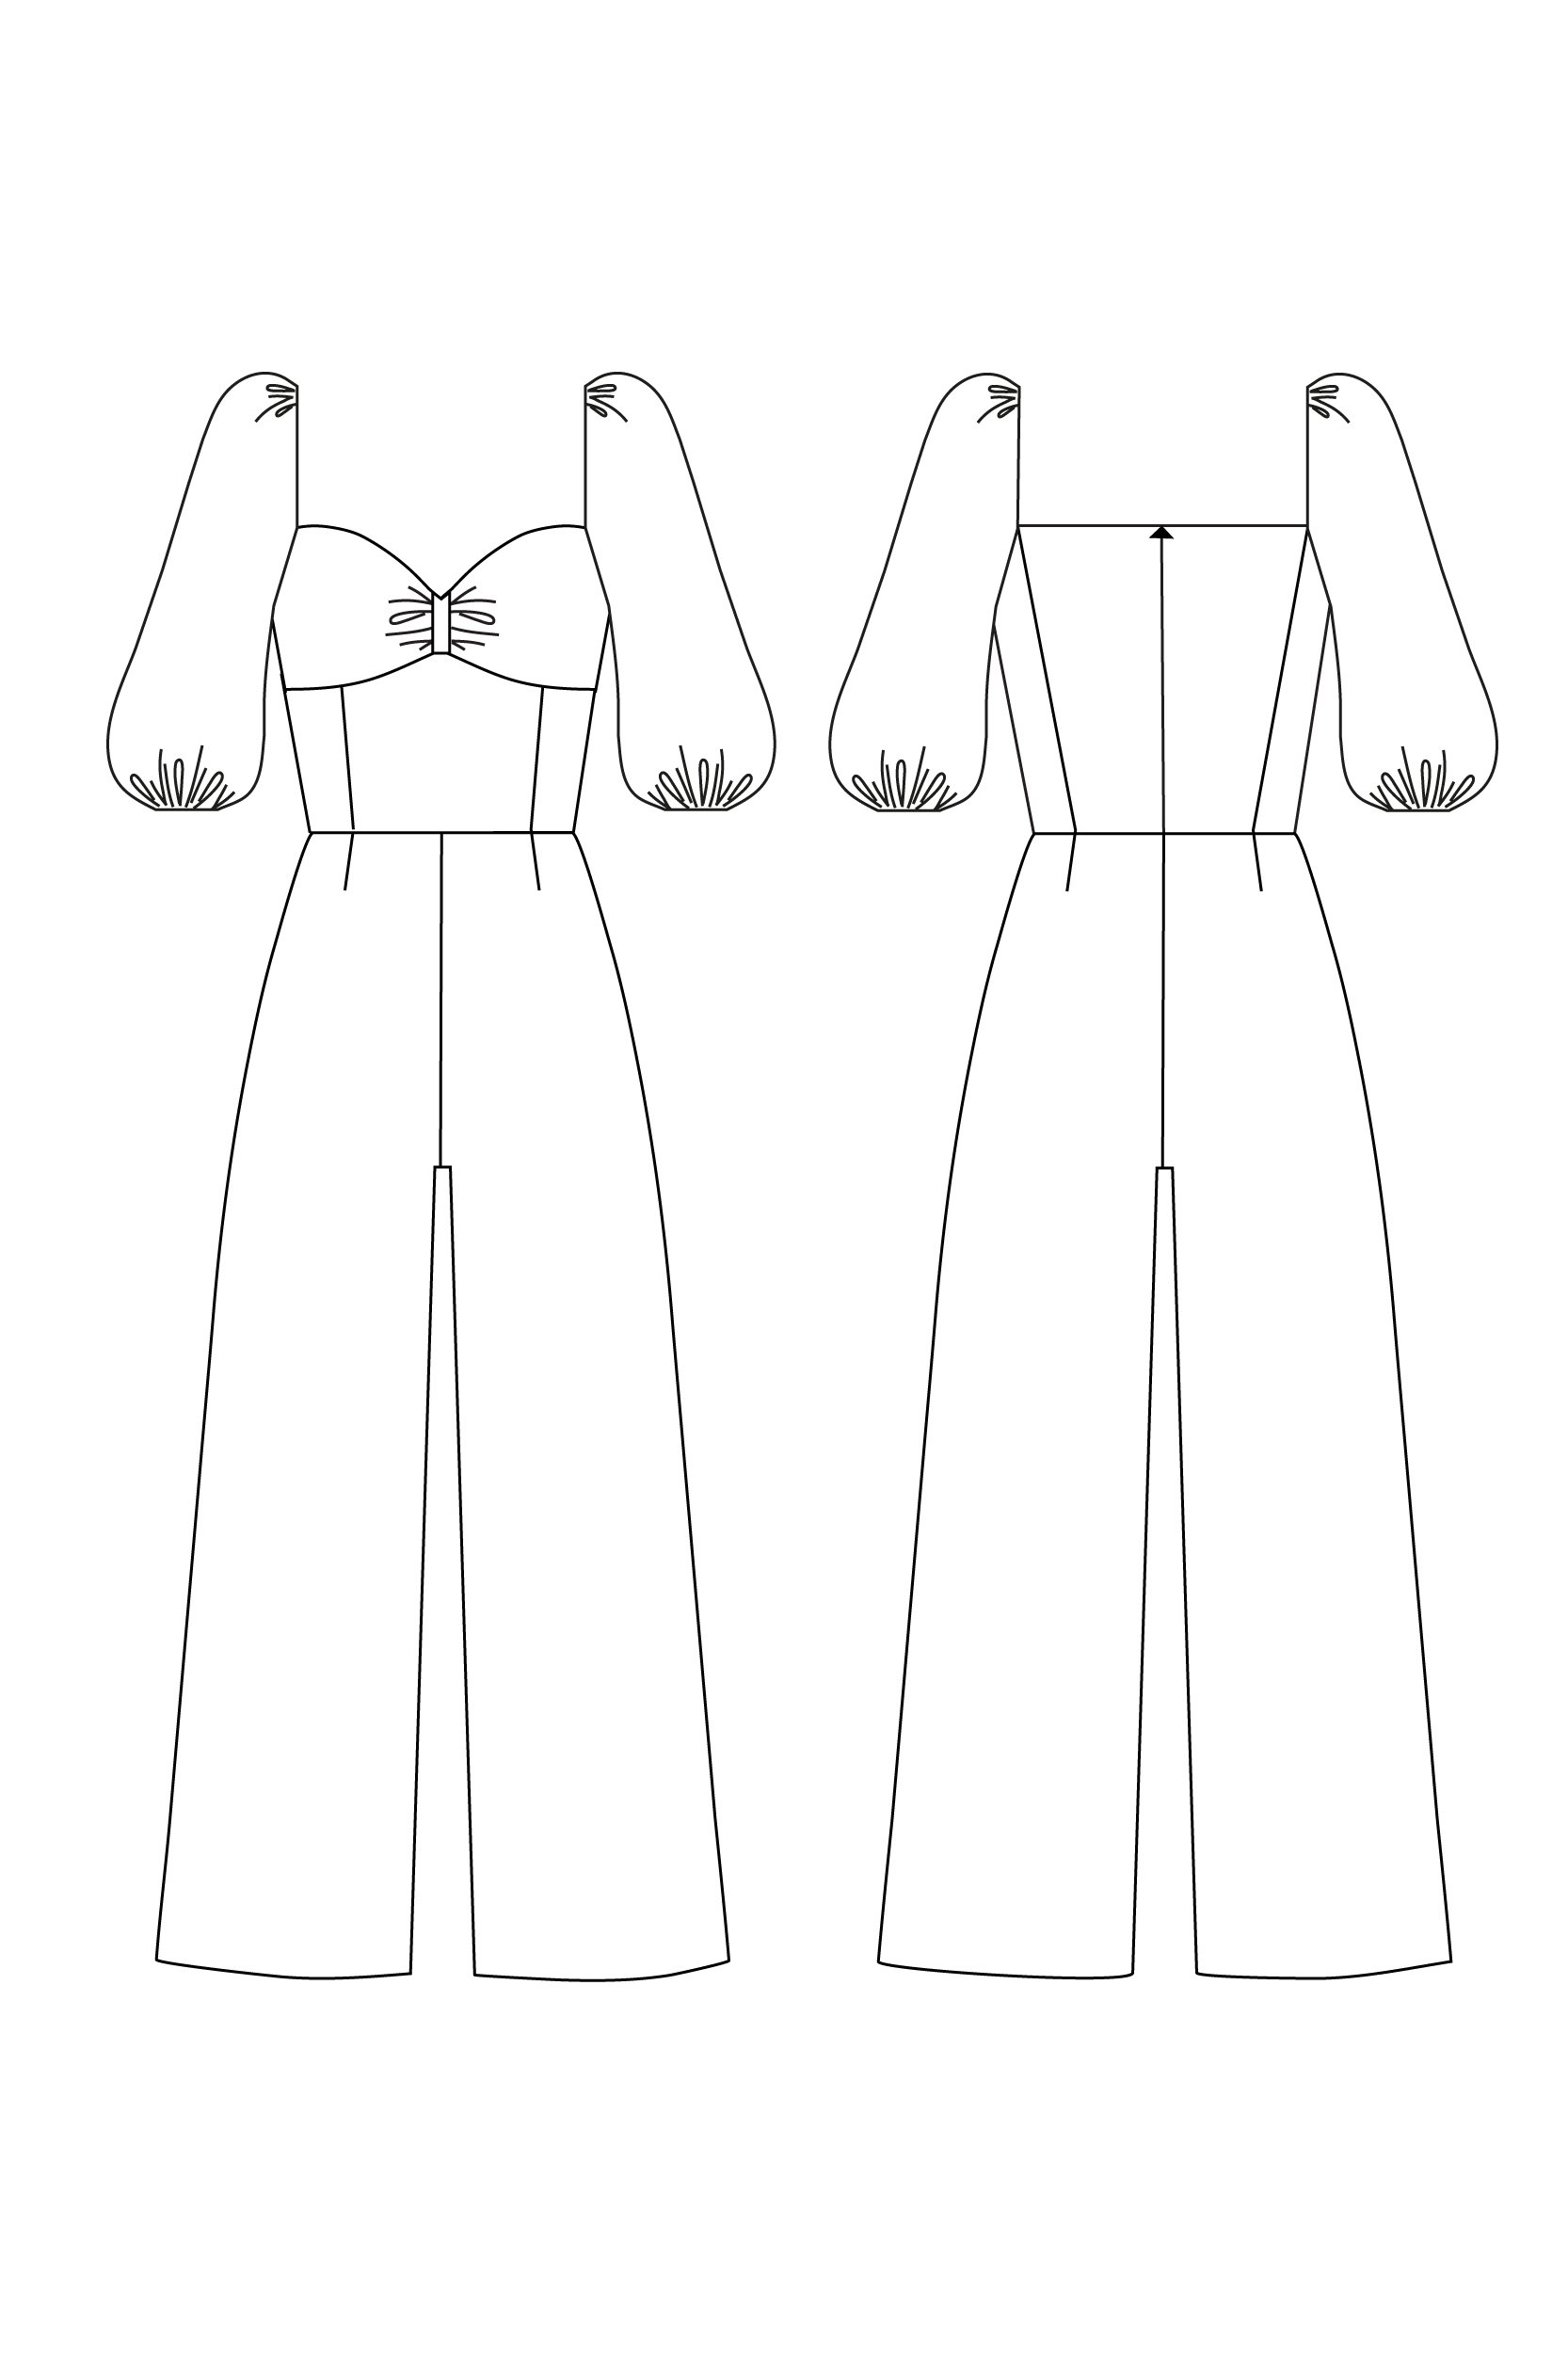 Buy Bodysuits Vectorjumpsuits Vectorfashion Flat Sketch for Online in  India  Etsy